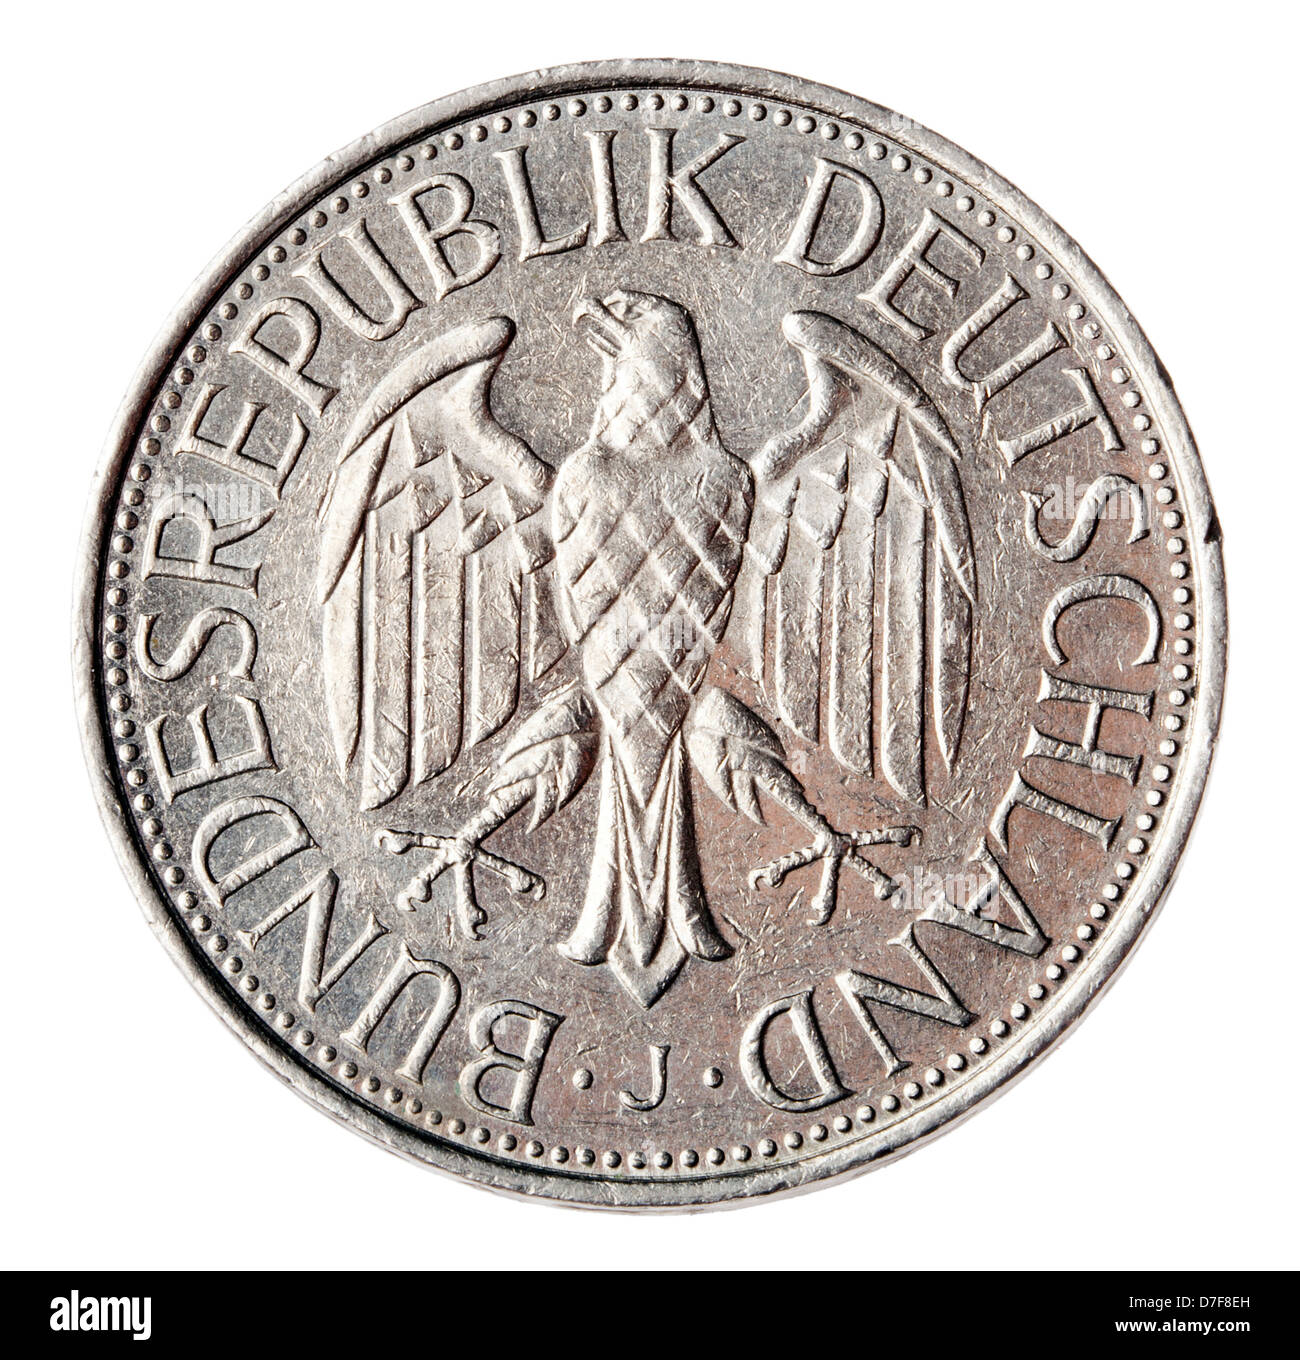 Frontal view reverse (tails) side a 1 Deutsche Mark (DM) coin minted in 1989. Depicted is German coat arms - German eagle. Stock Photo